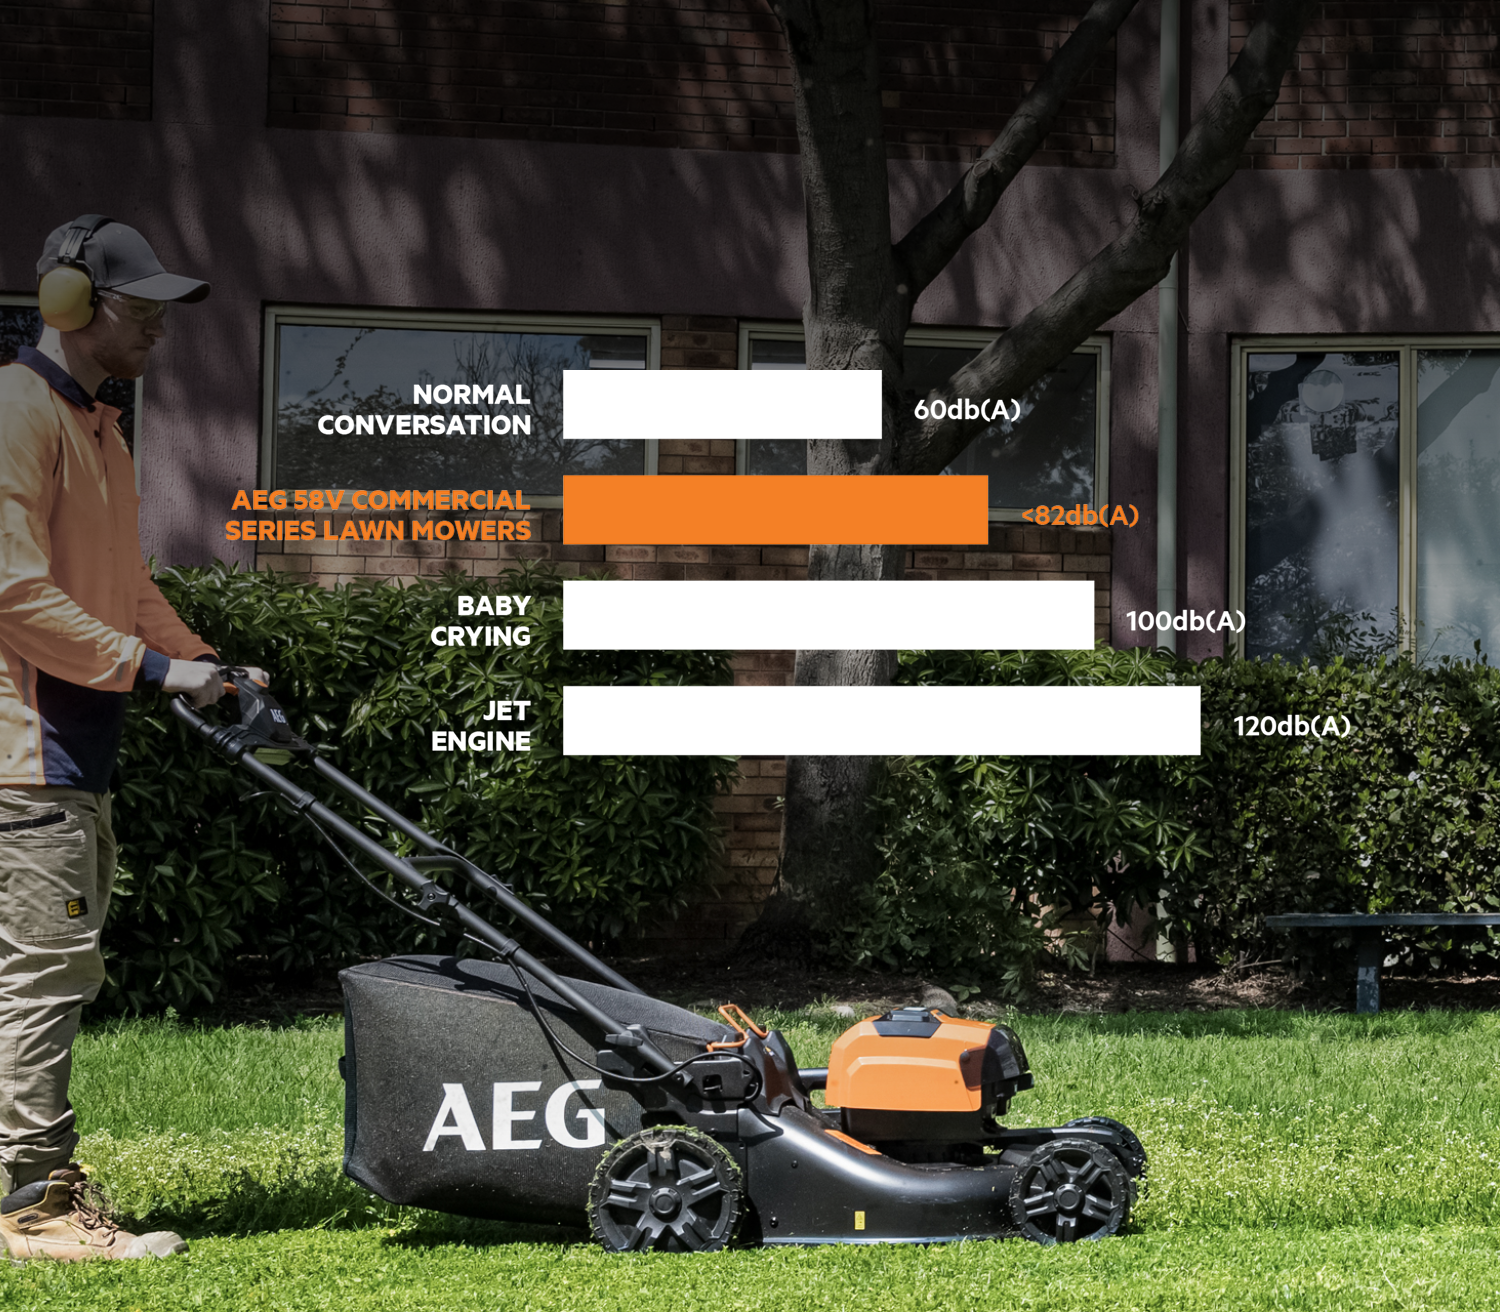 A diagram highlighting the quiet performance of the AEG 58V commercial series lawn mowers